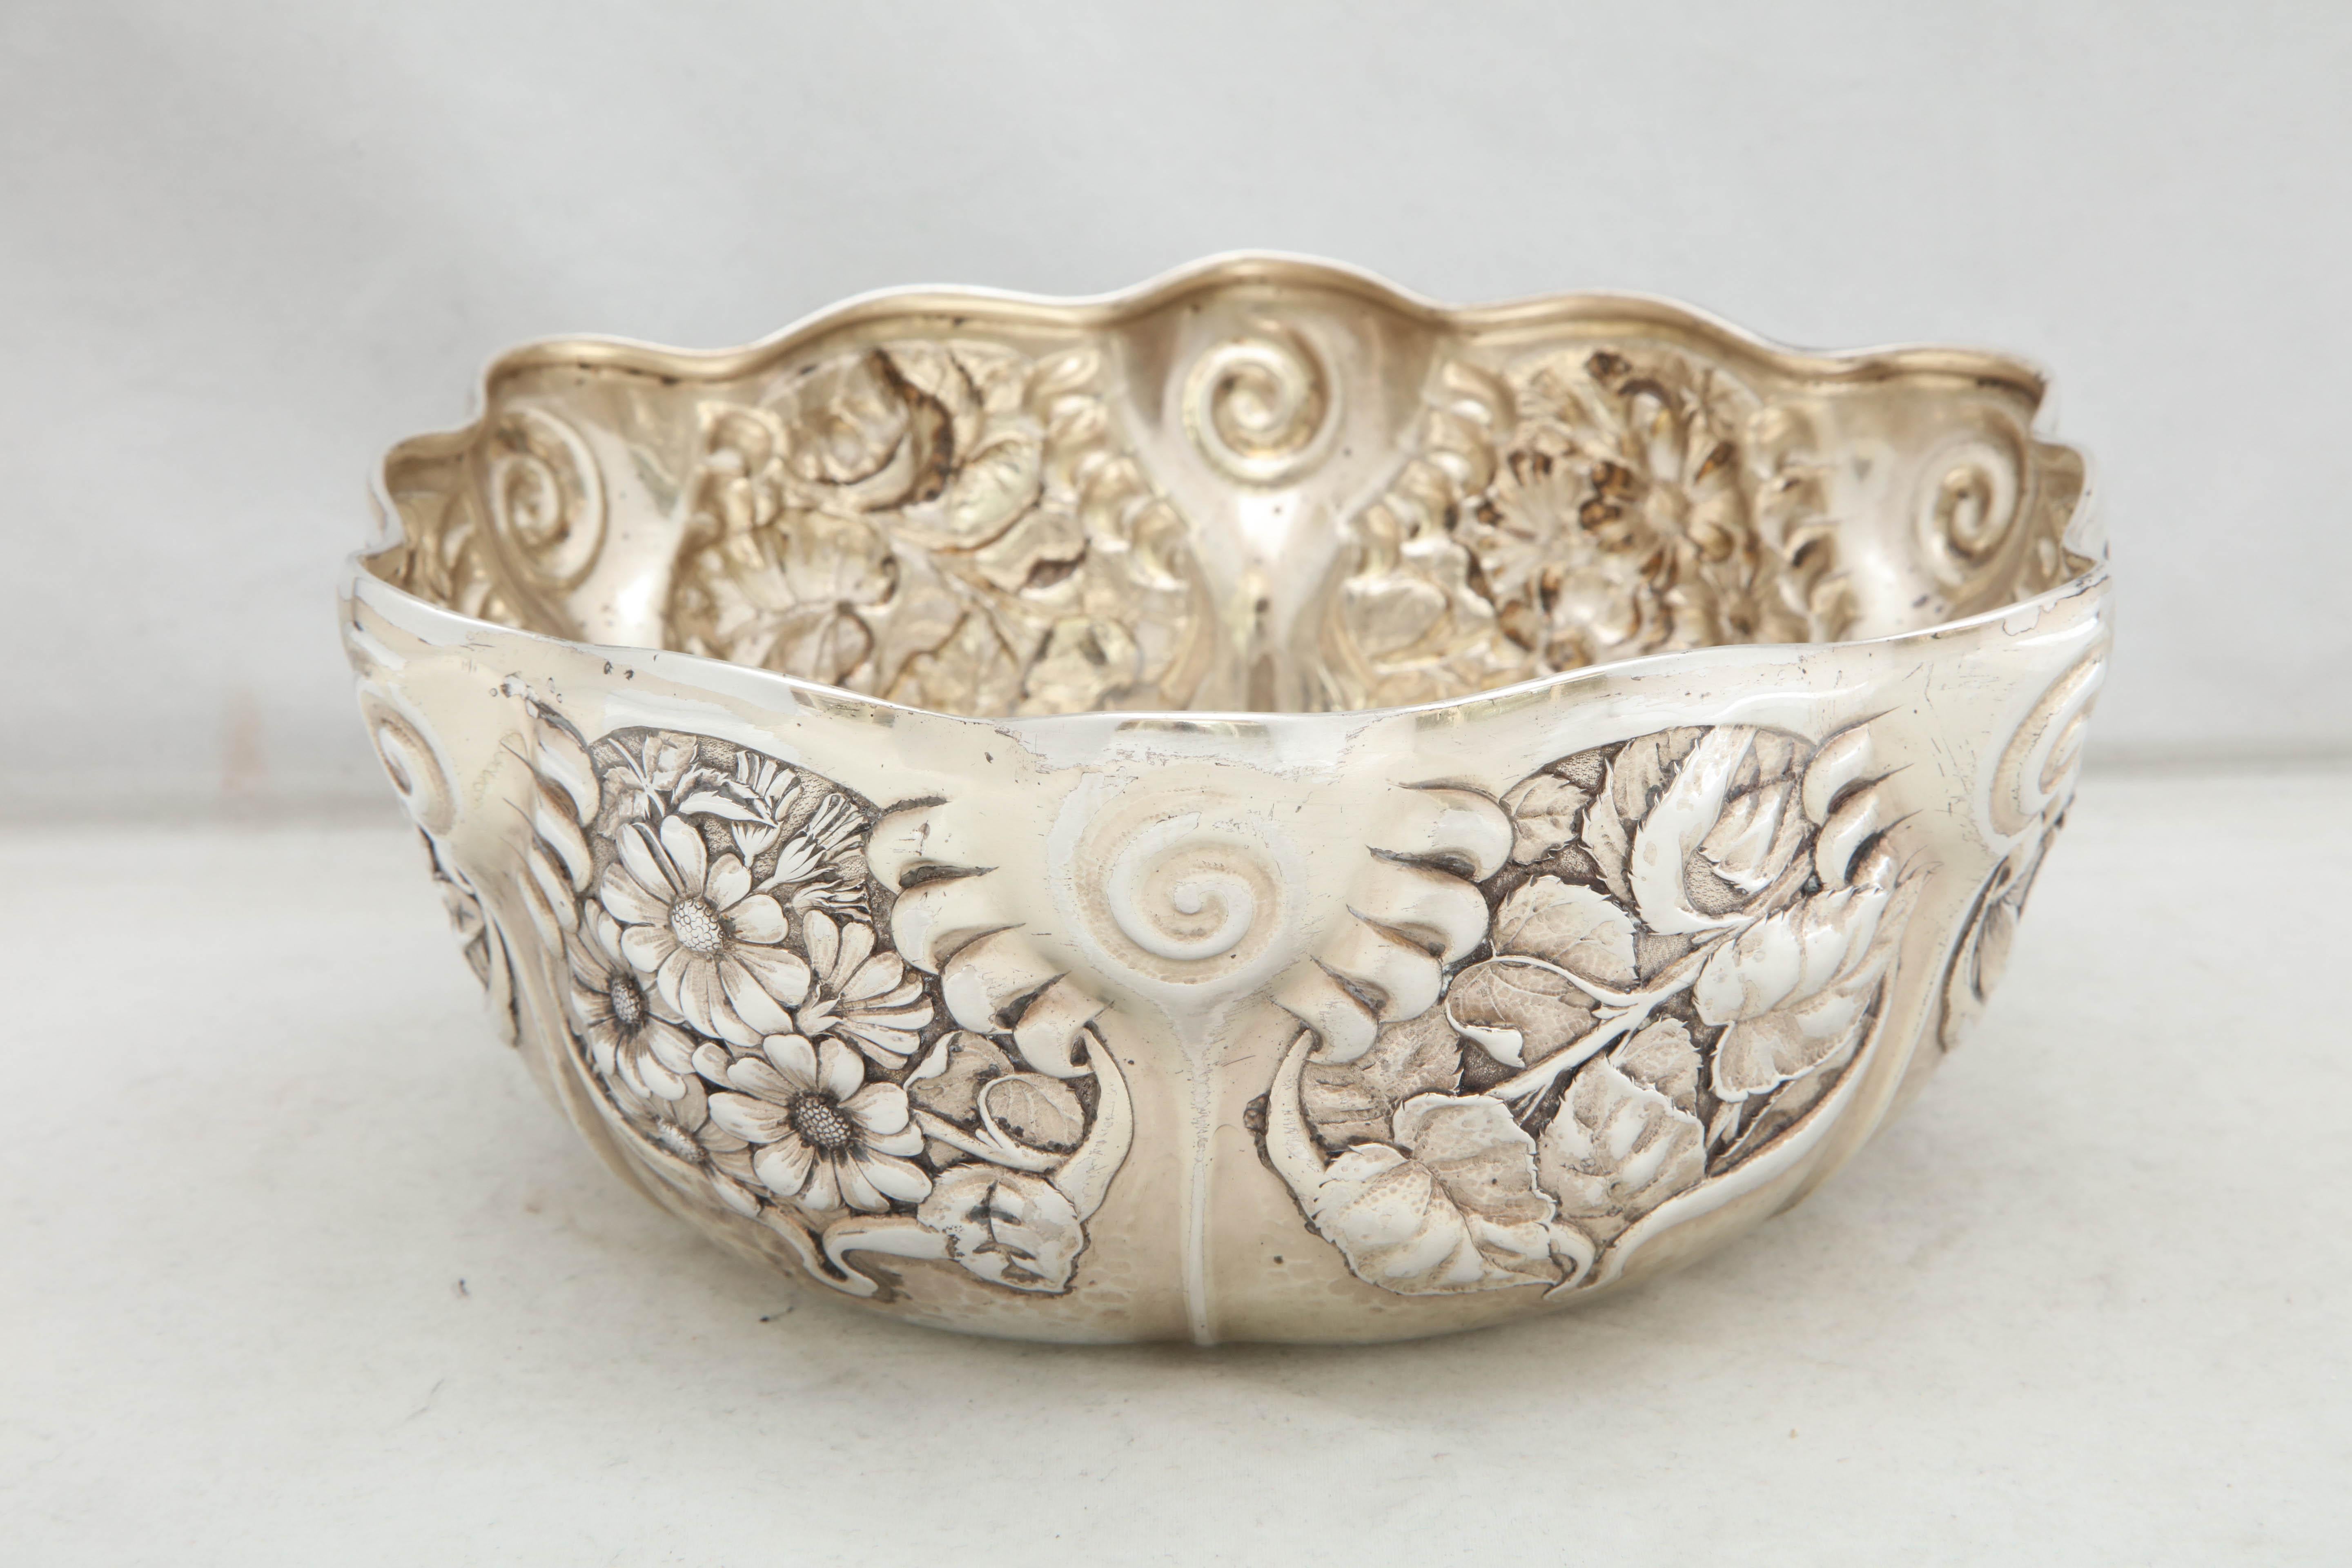 Art Nouveau, sterling silver serving bowl, Whiting Manufacturing Co., New York, circa 1900. Chased with lovely flowers. Measures 3 1/2 inches high x 8 1/2 inches diameter. Weighs 12.910 Troy ounces. Dark spots in photos are reflections. Excellent